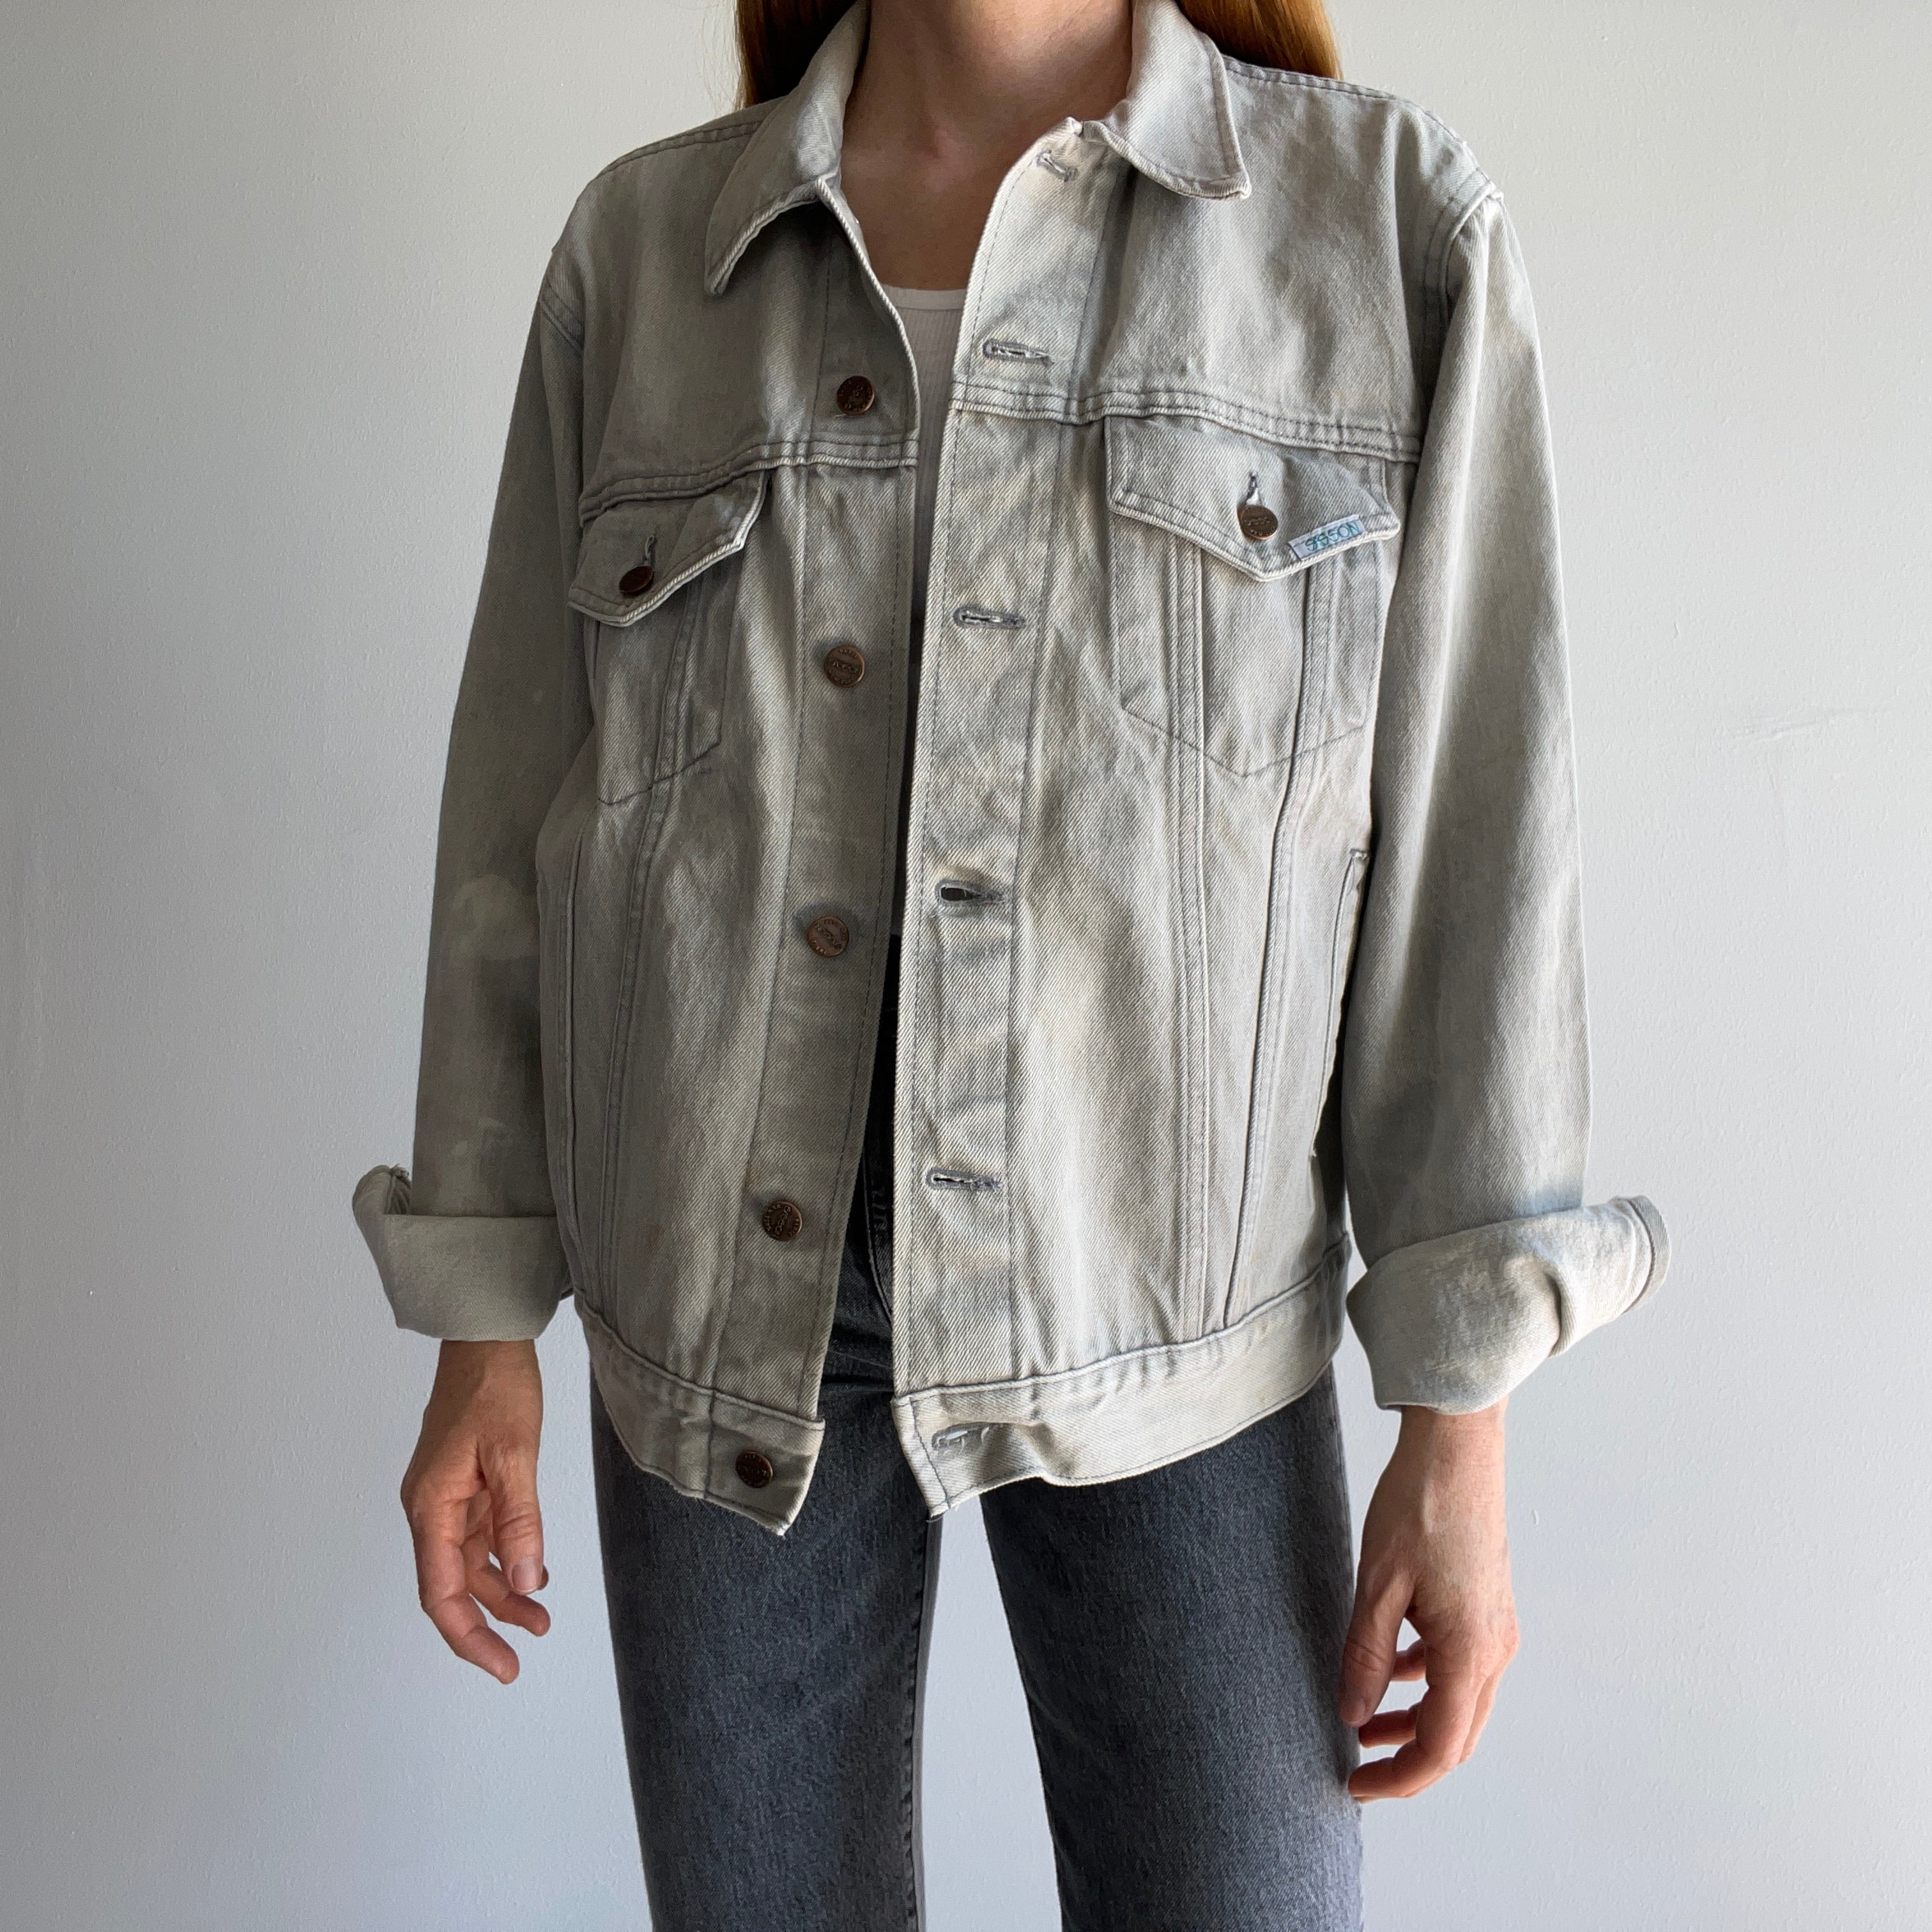 Denim Jacket For Women at Best Price in Ghaziabad | Fabtech Innovations